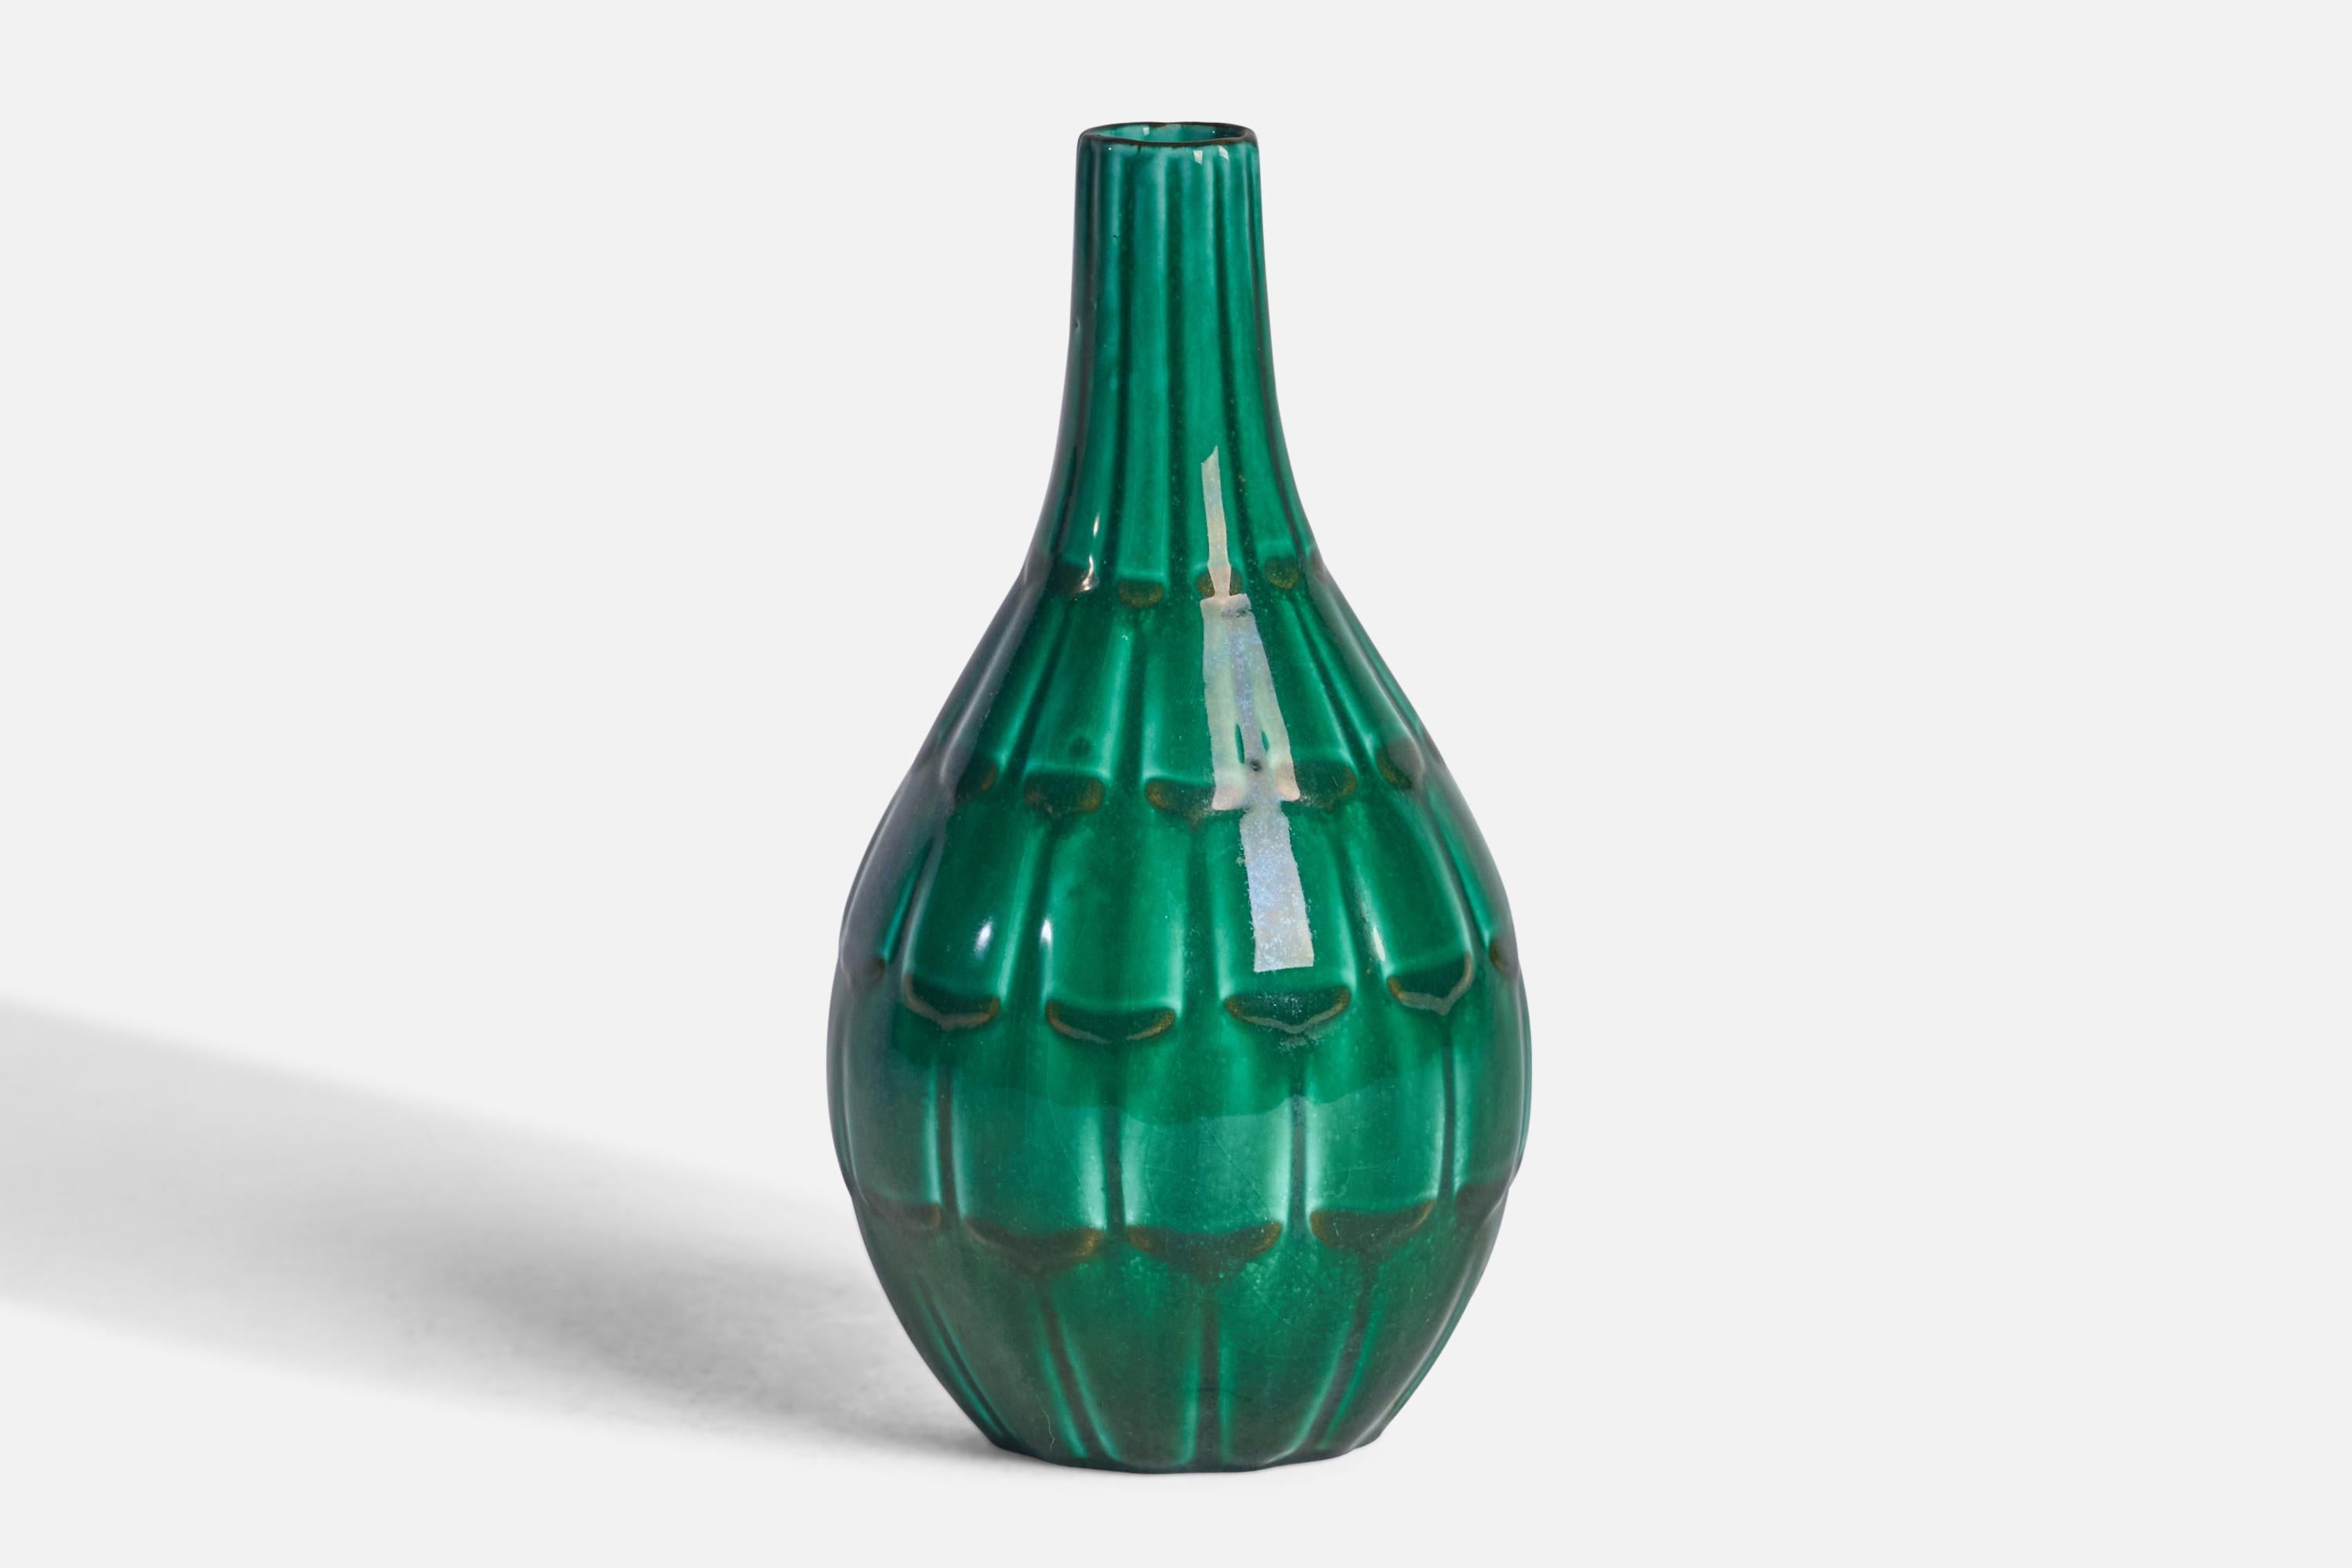 A green-glazed earthenware vase designed by Anna-Lisa Thomson and produced by Upsala Ekeby, Sweden, 1930s.